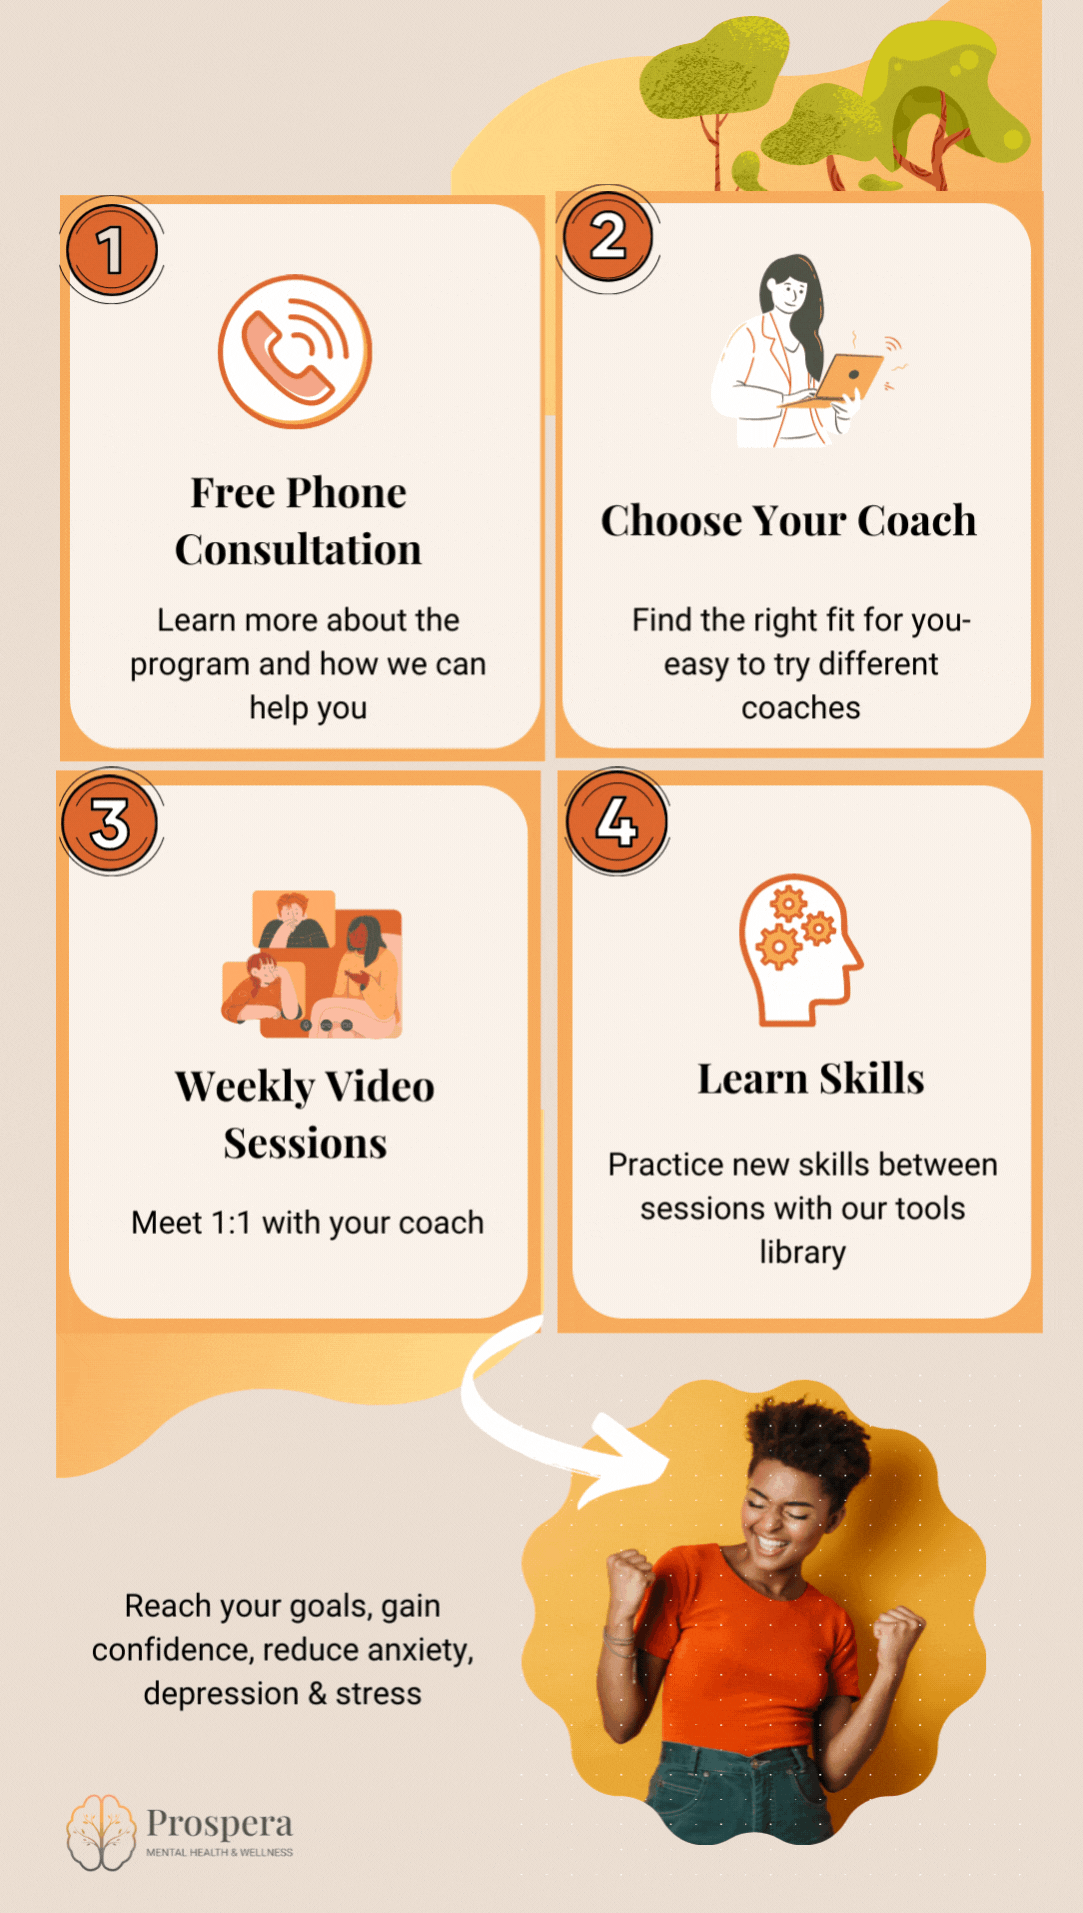 The four steps to getting started with Prospera, which is an alternative to postpartum therapy). The four steps are: schedule a phone consult, choose your coach, weekly coaching sessions, learn copy skills for postpartum depression and anxiety.